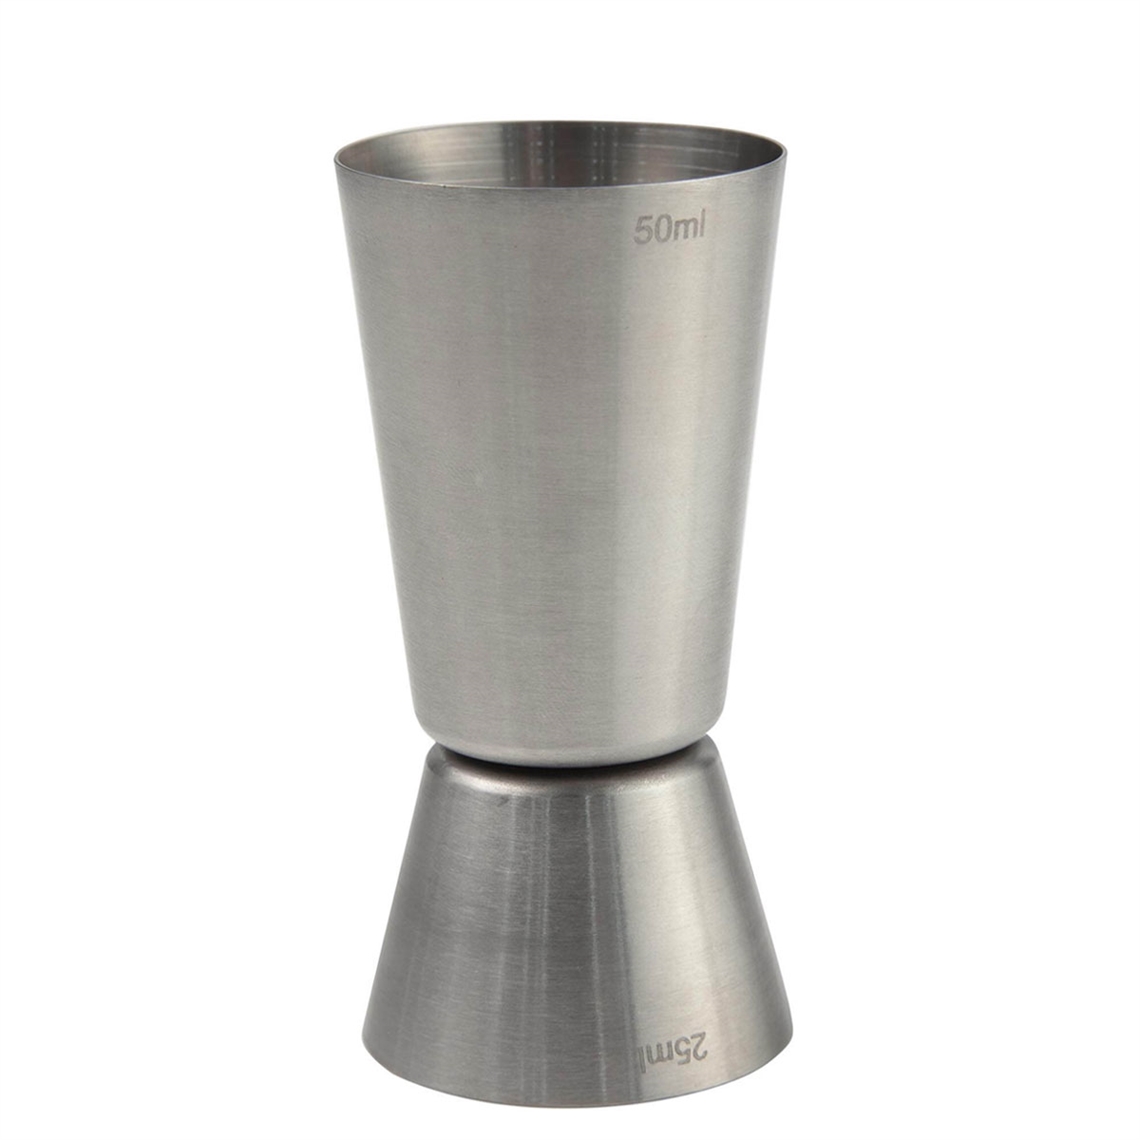 View more cocktail shakers from our Spirit and Wine Bar Thimble Measures range